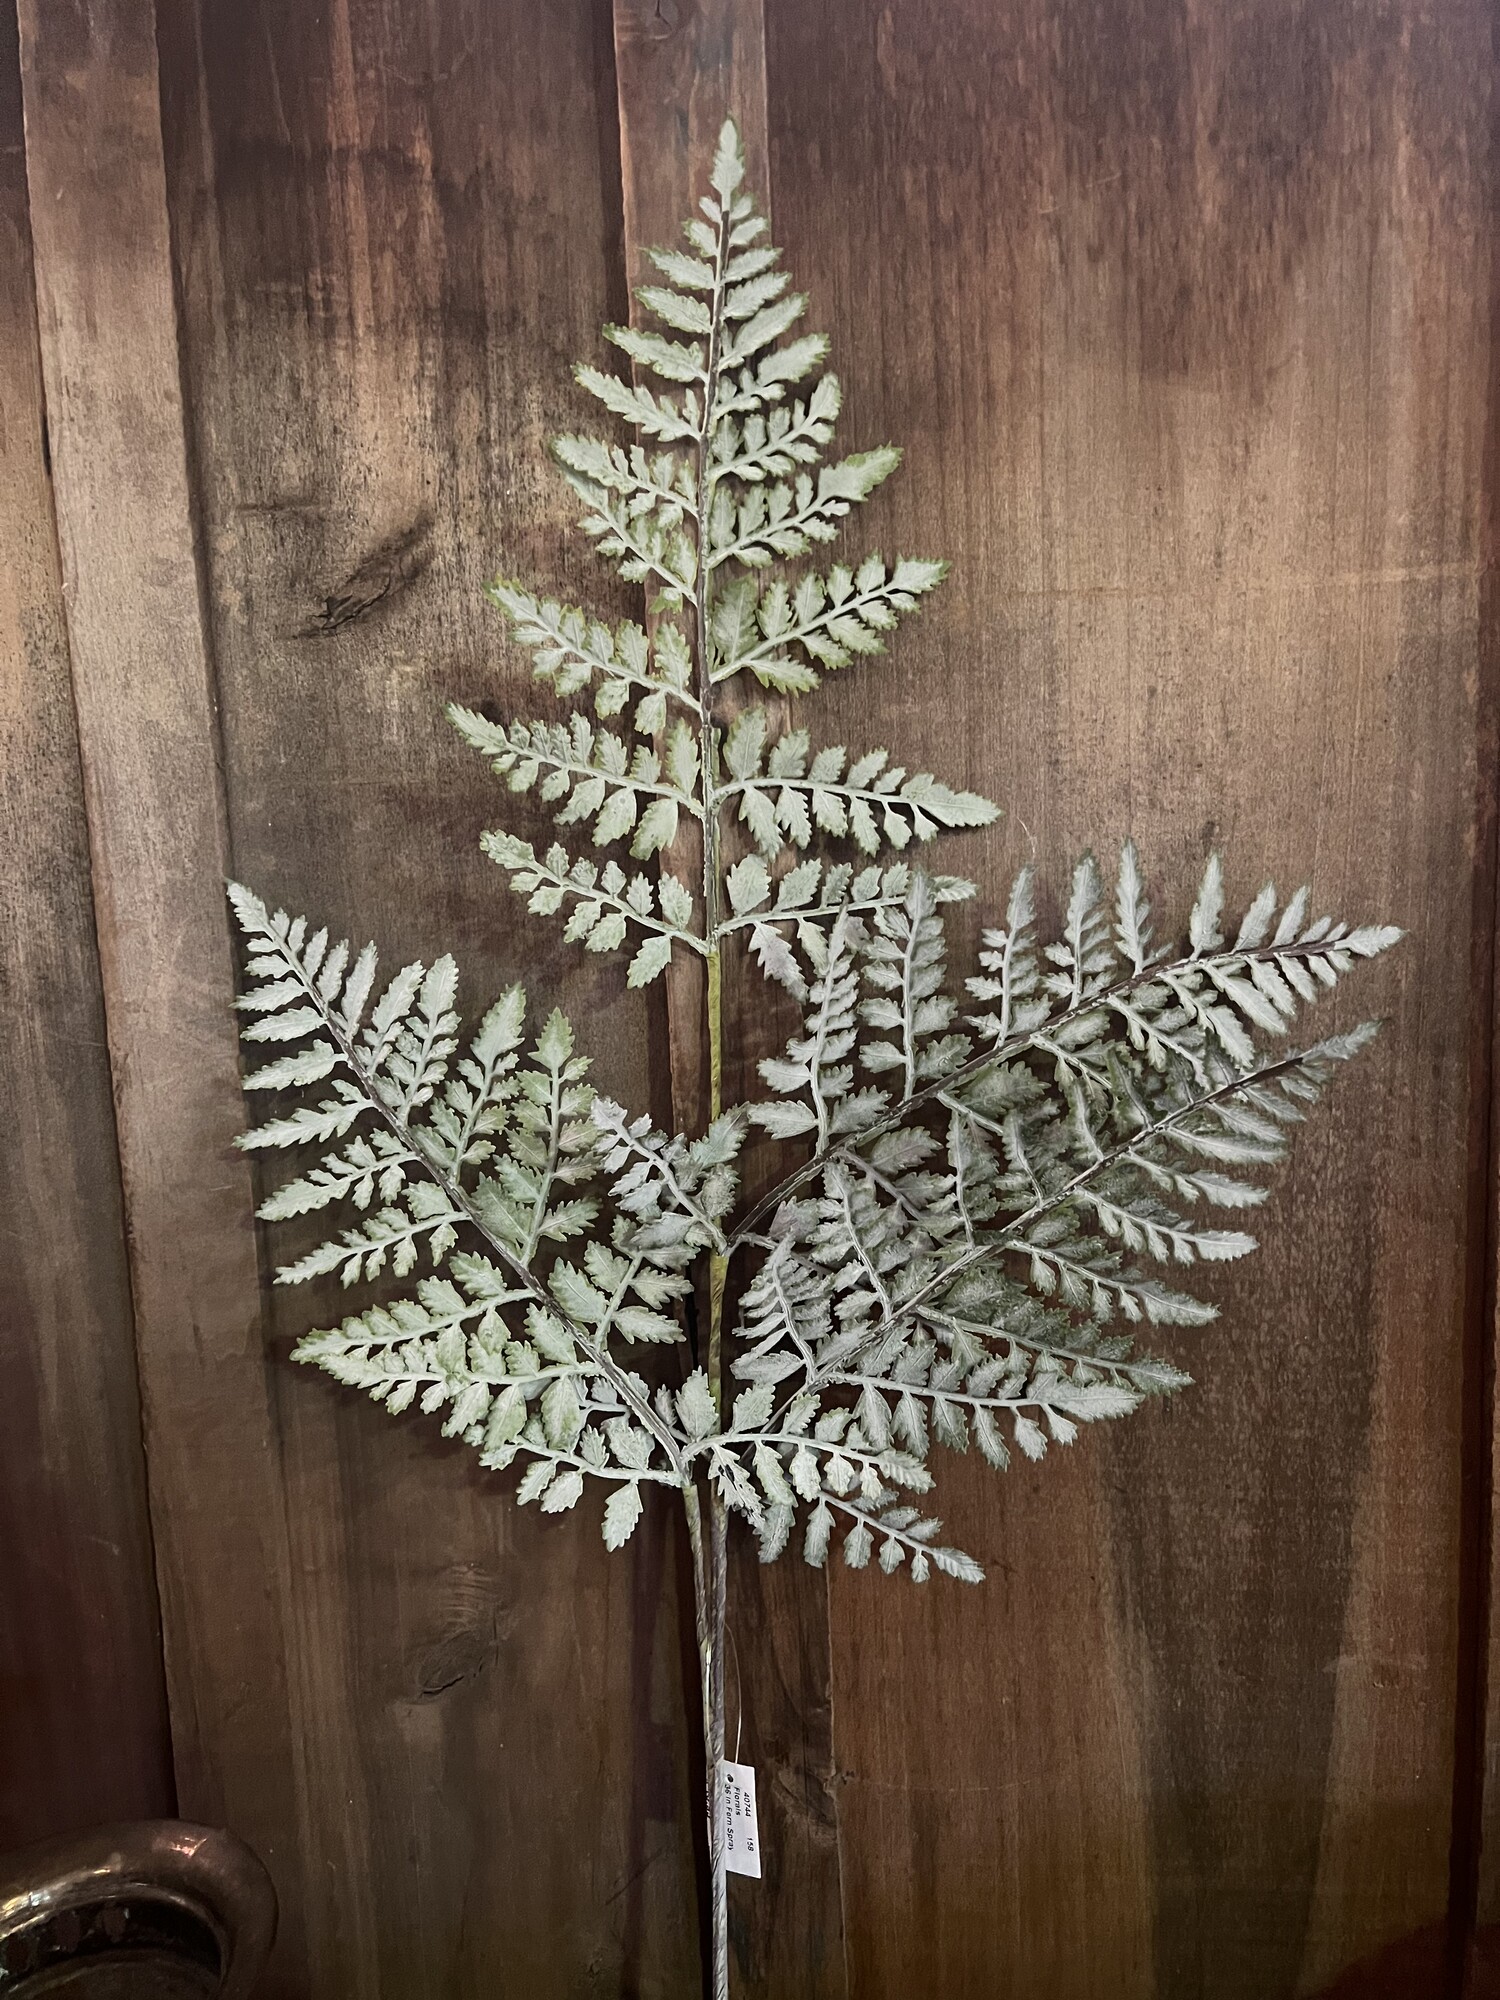 This Fern Spray is perfect for any season, wether its in an arrangement or a few grouped together in a vase.
This floral will work in any room with any decor. Spray measures 36 inches in length but can be bent or cut to fit any size vase